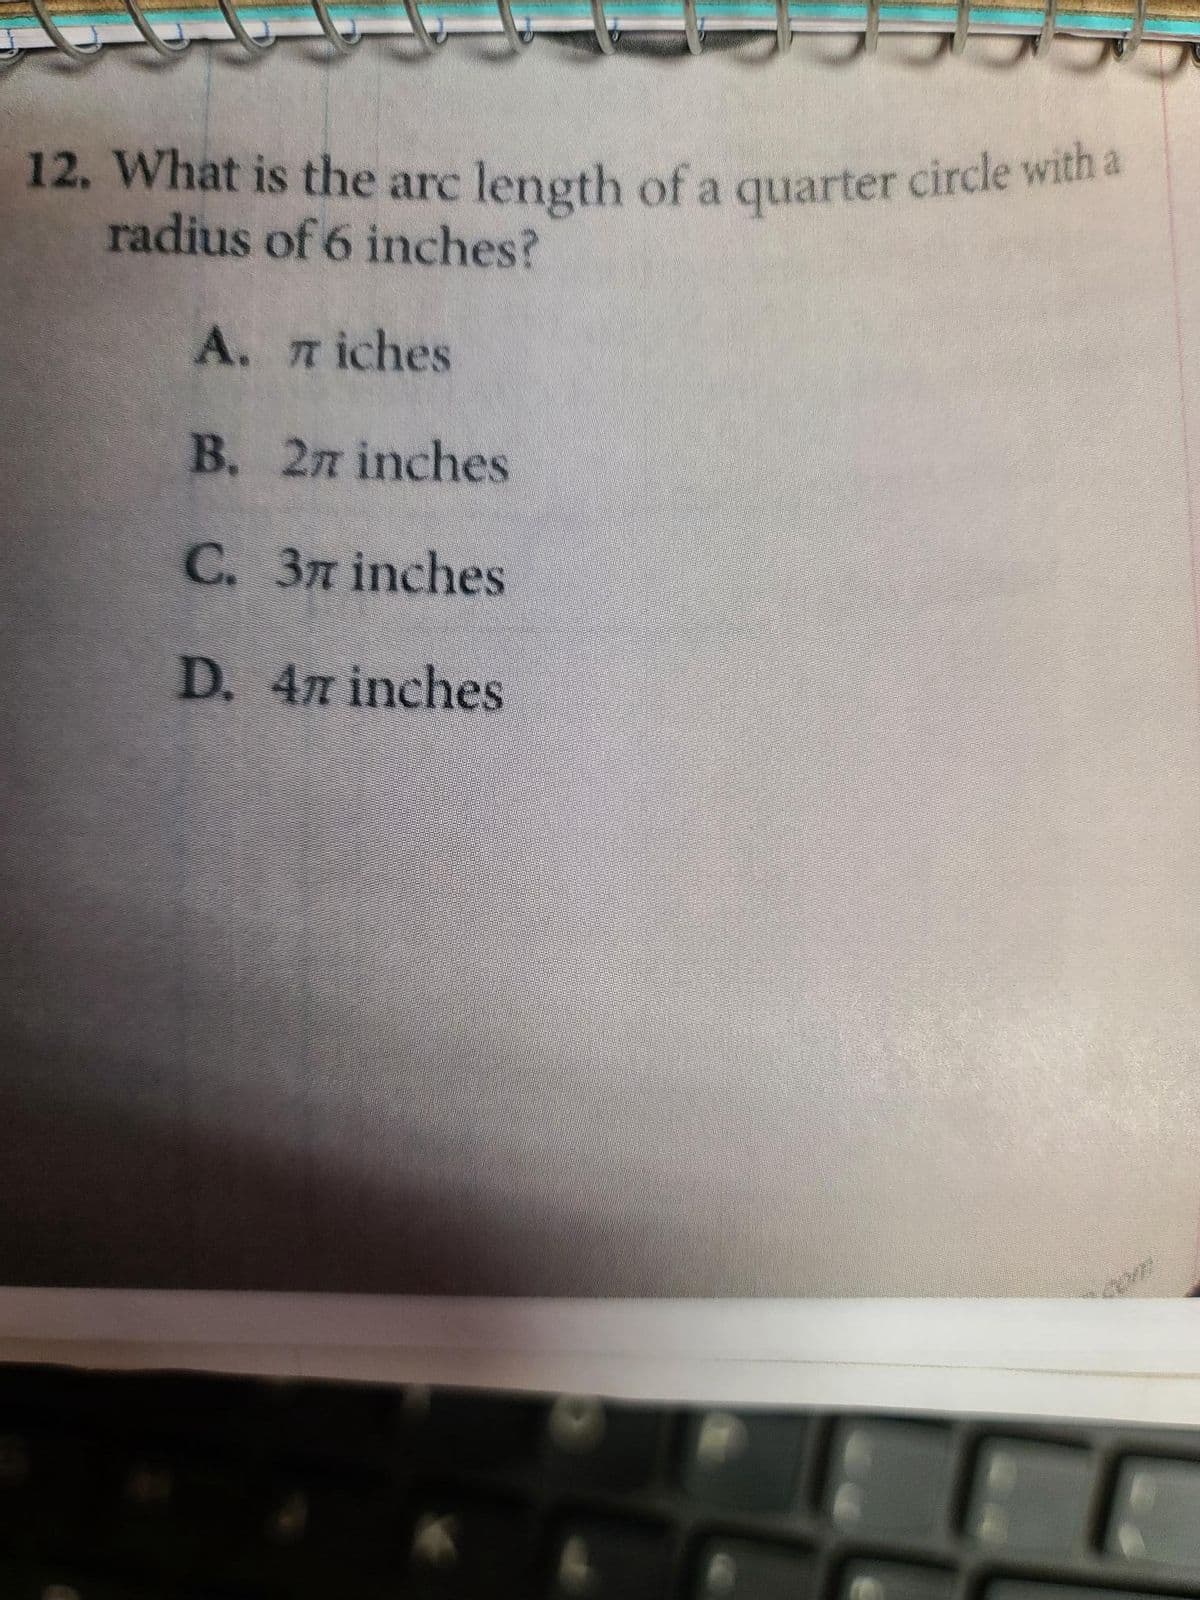 12. What is the arc length of a quarter circle with a
radius of 6 inches?
A. Tiches
B. 27 inches
C. 37 inches
D. 47 inches